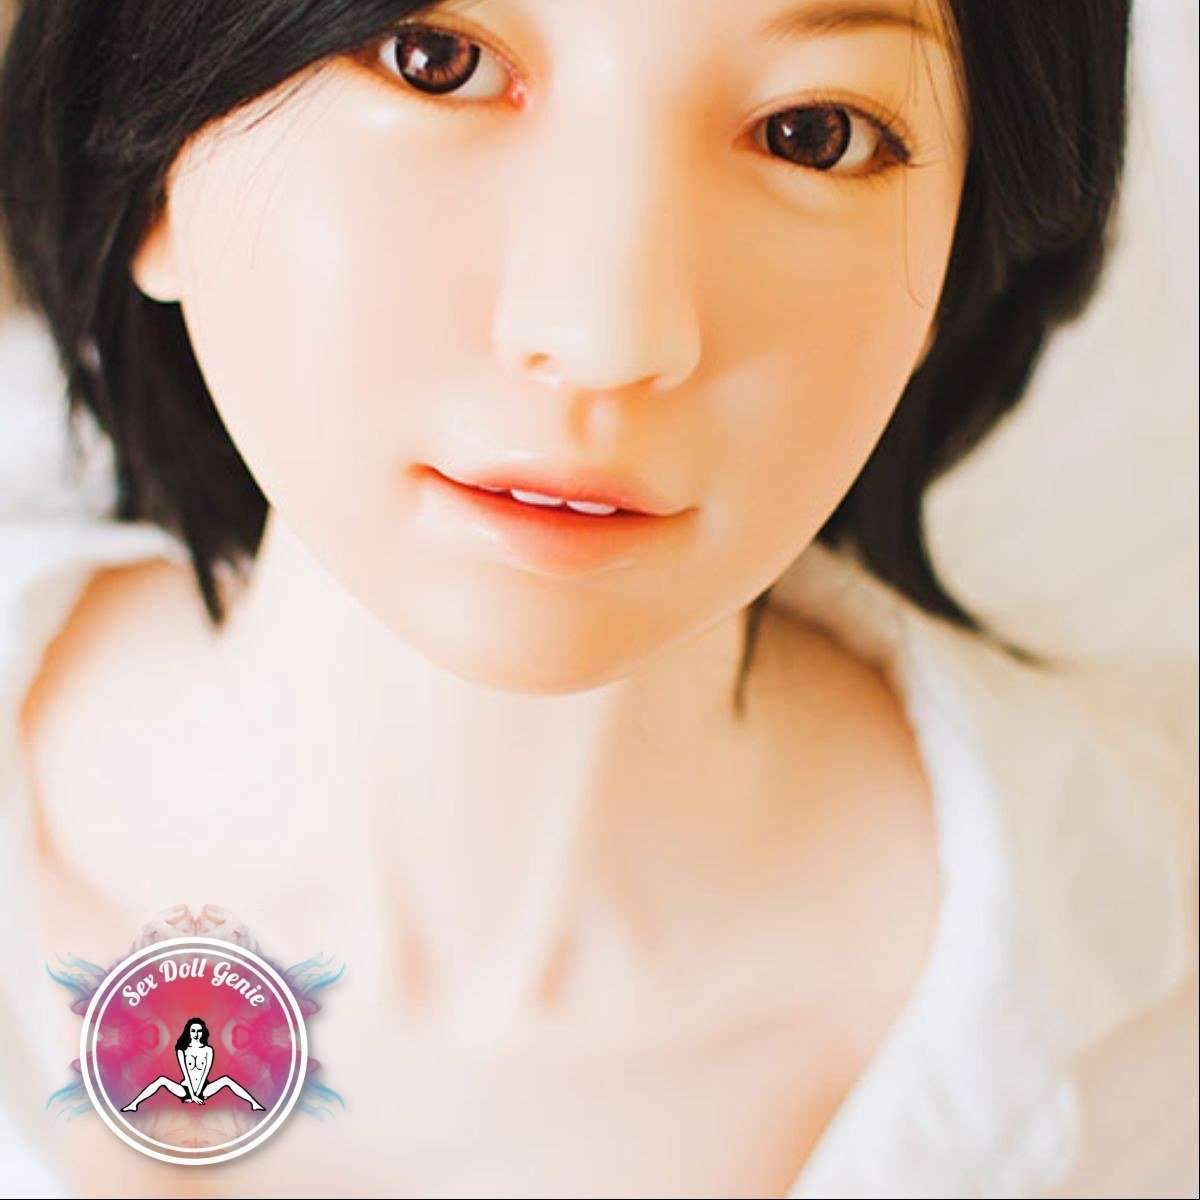 DS Doll - 158Plus - Nanase Head - Type 1 D Cup Silicone Doll-23